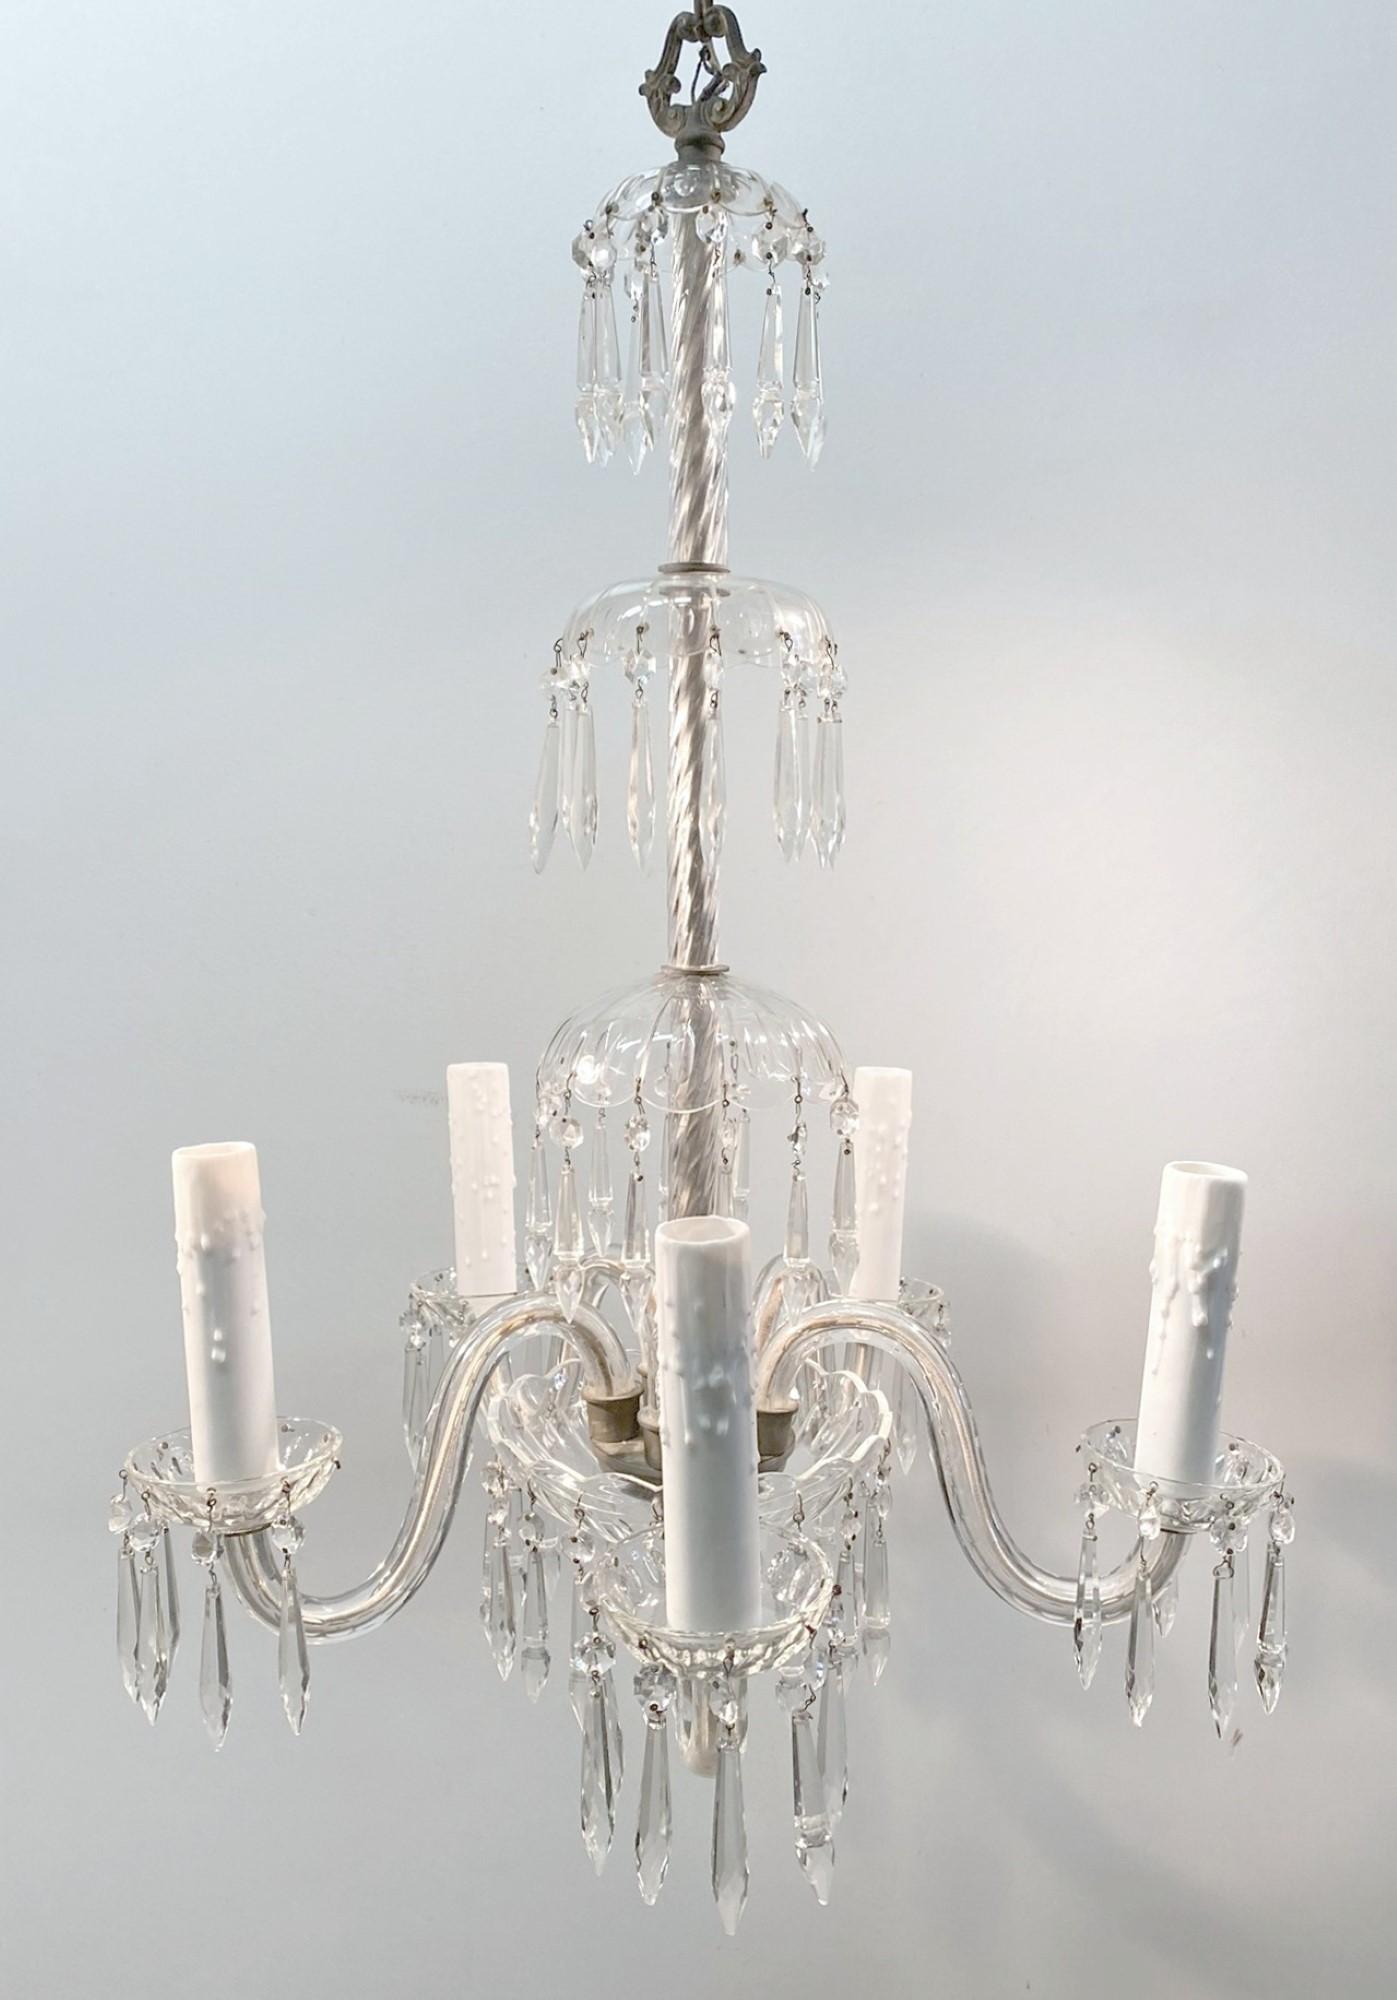 1920s five arm crystal chandelier with long needle crystals with 5 candelabra lights. Cleaned and rewired. Please note, this item is located in one of our NYC locations.